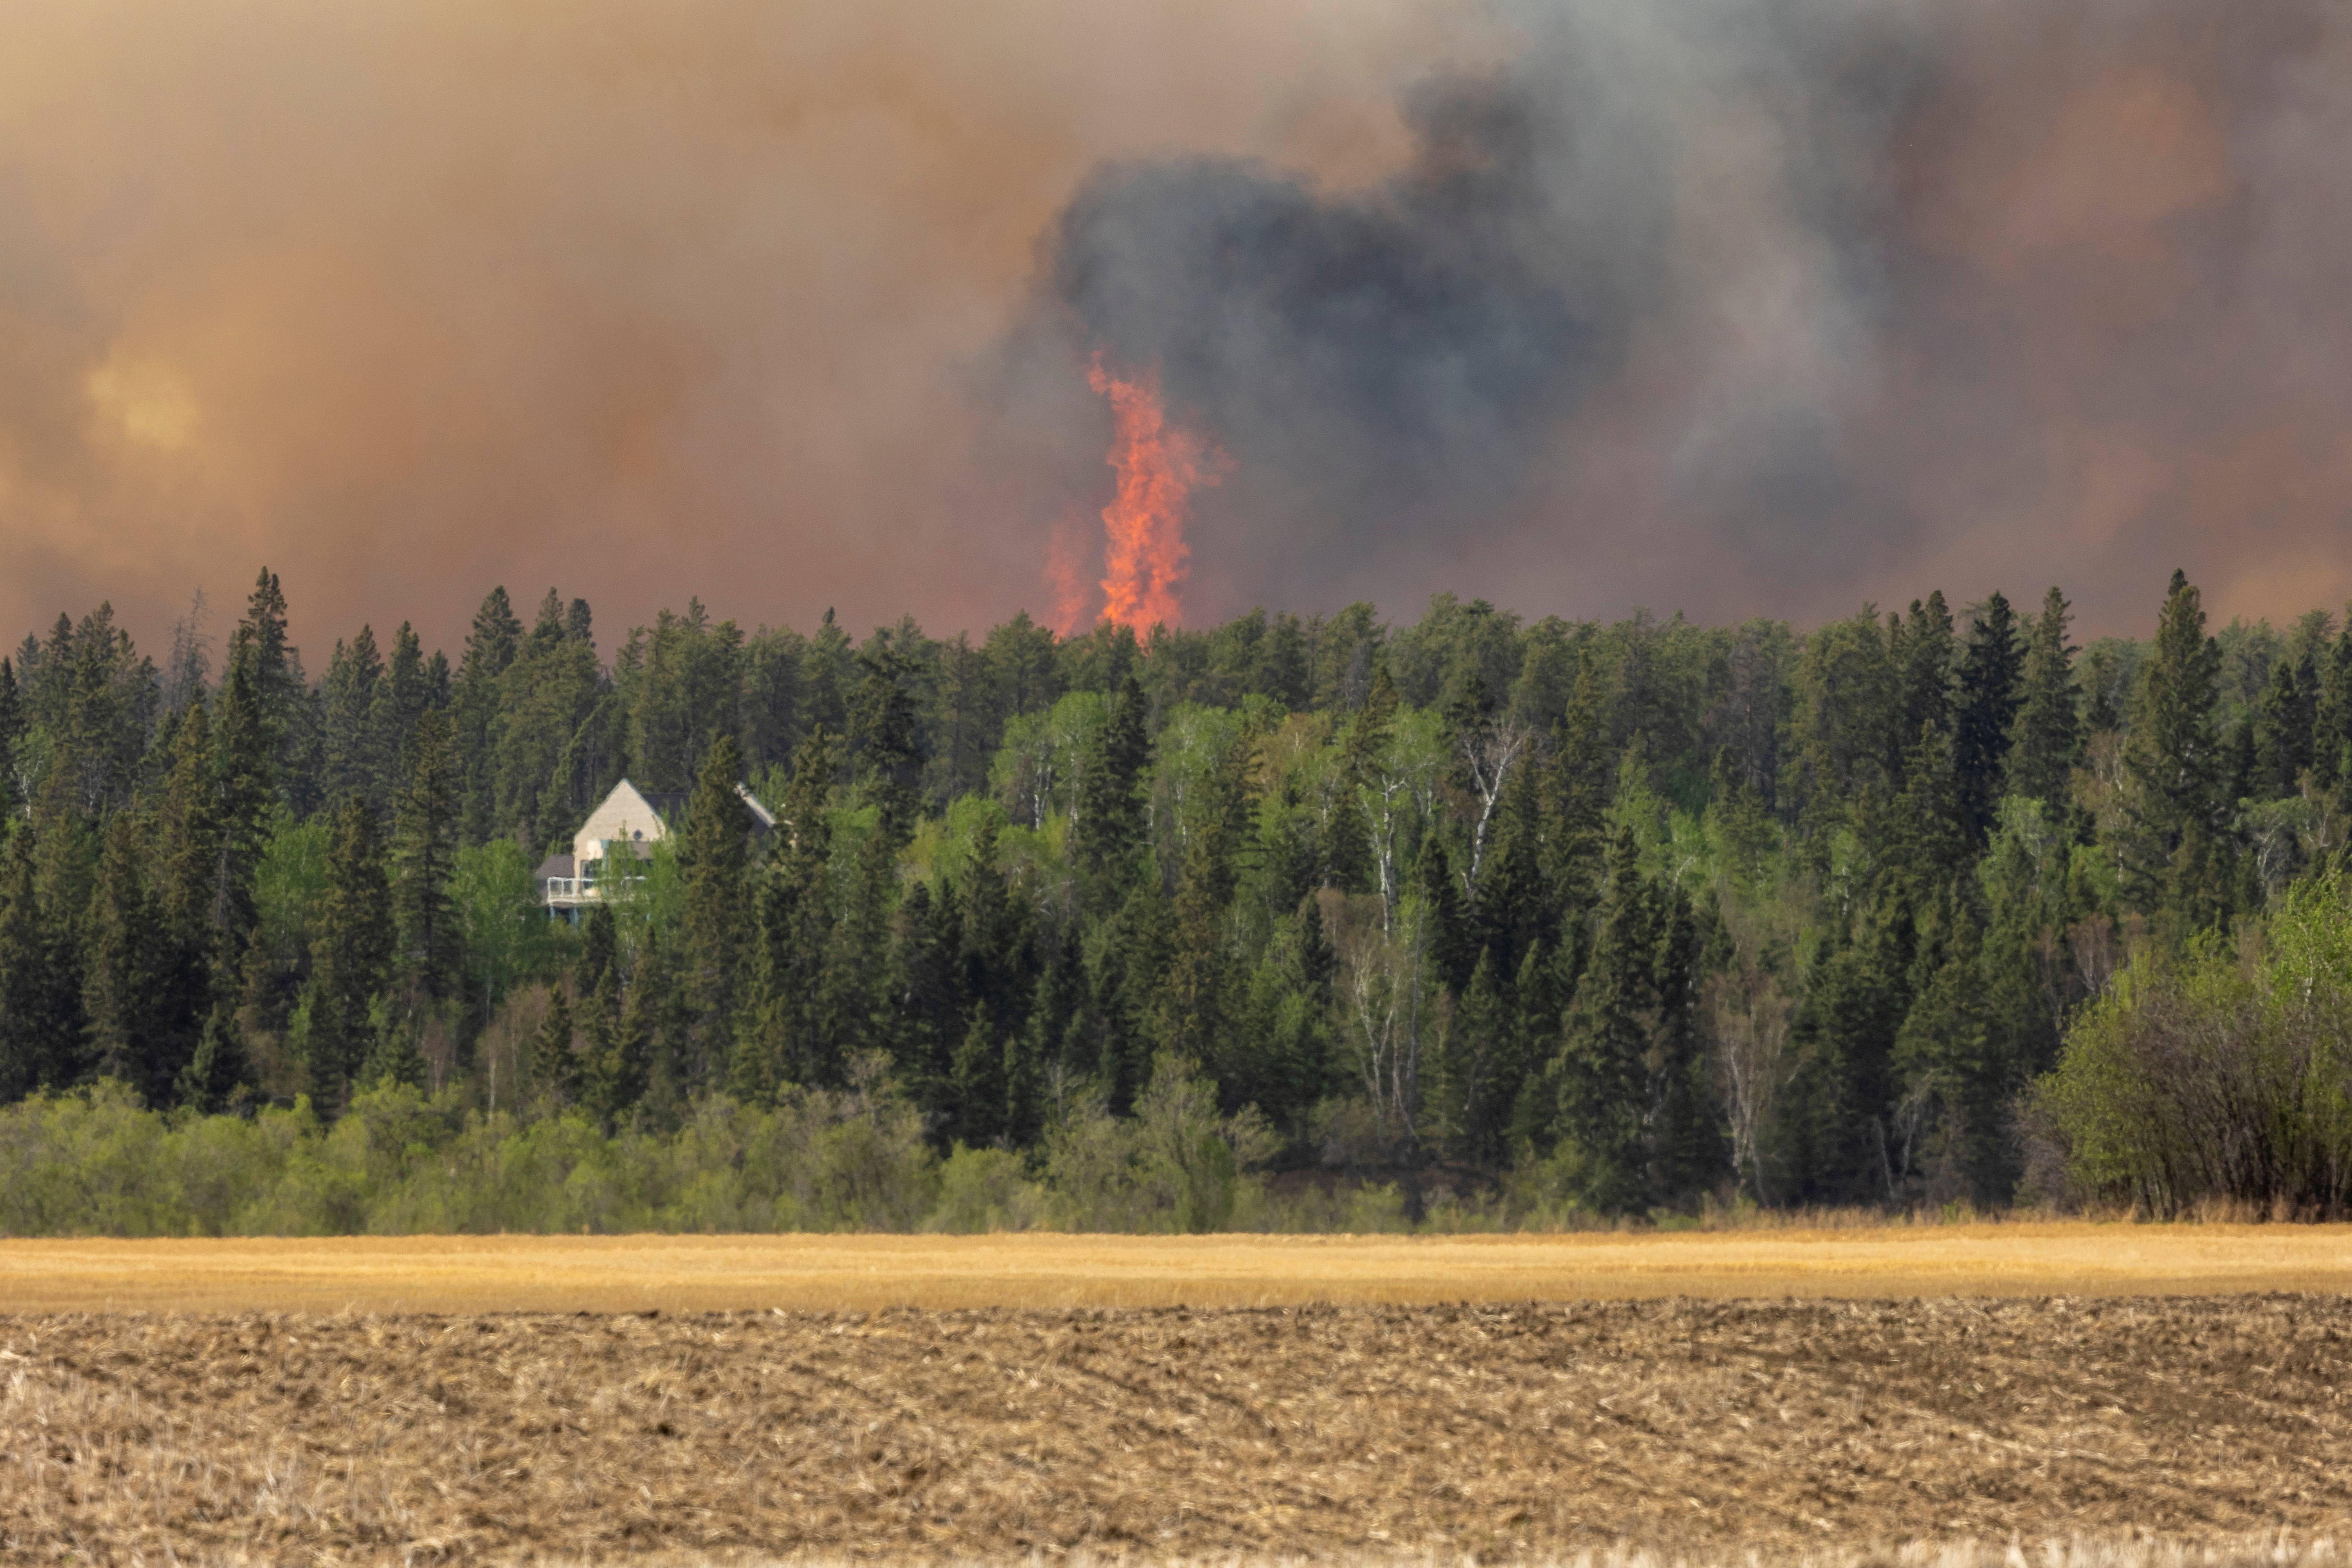 Prince Albert declares a state of emergency over a fast-moving wildfire